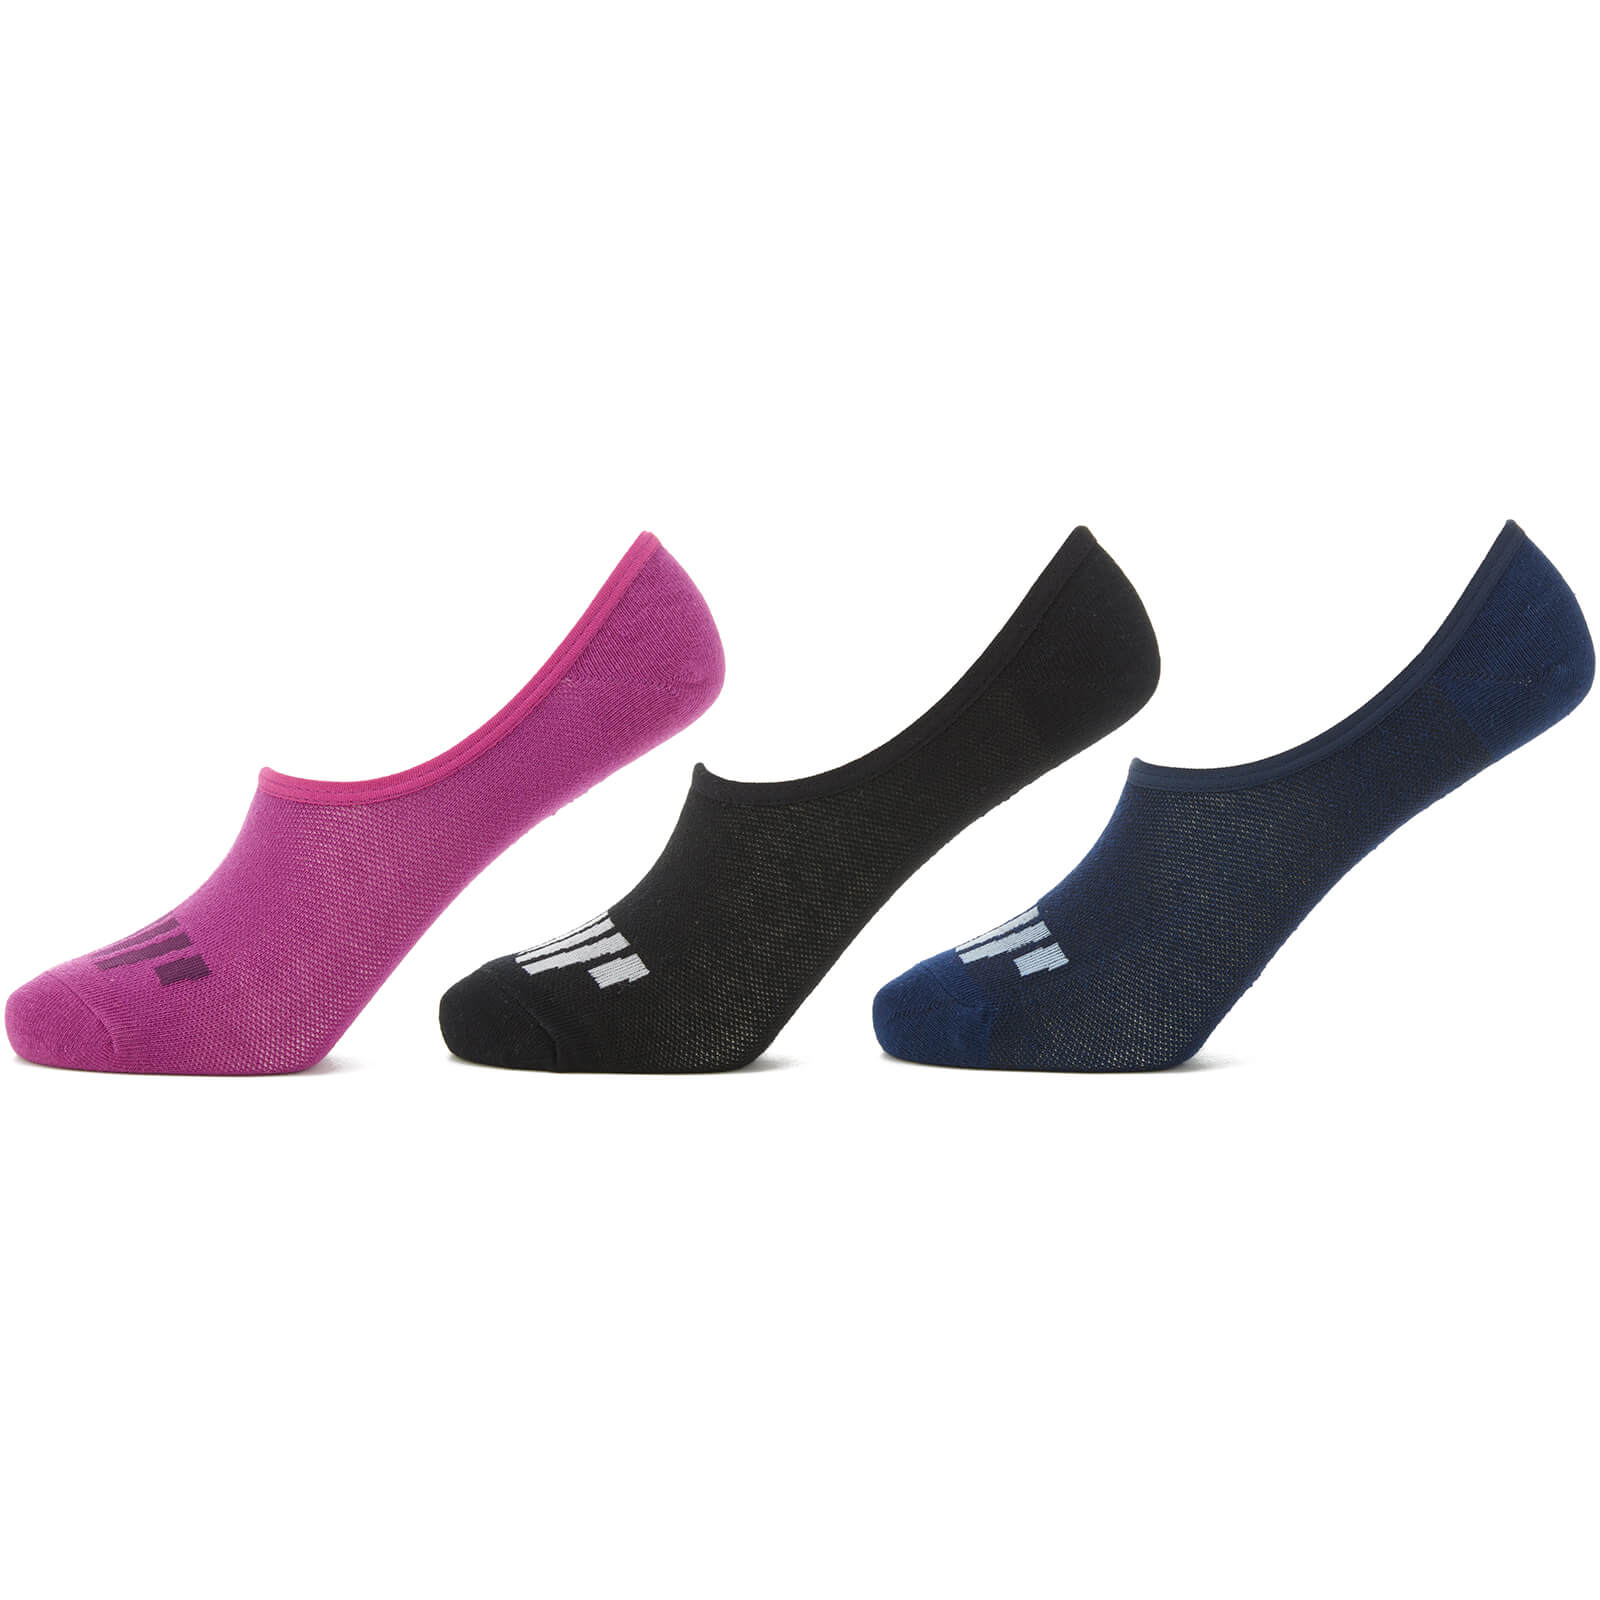 Myprotein Invisible Socks